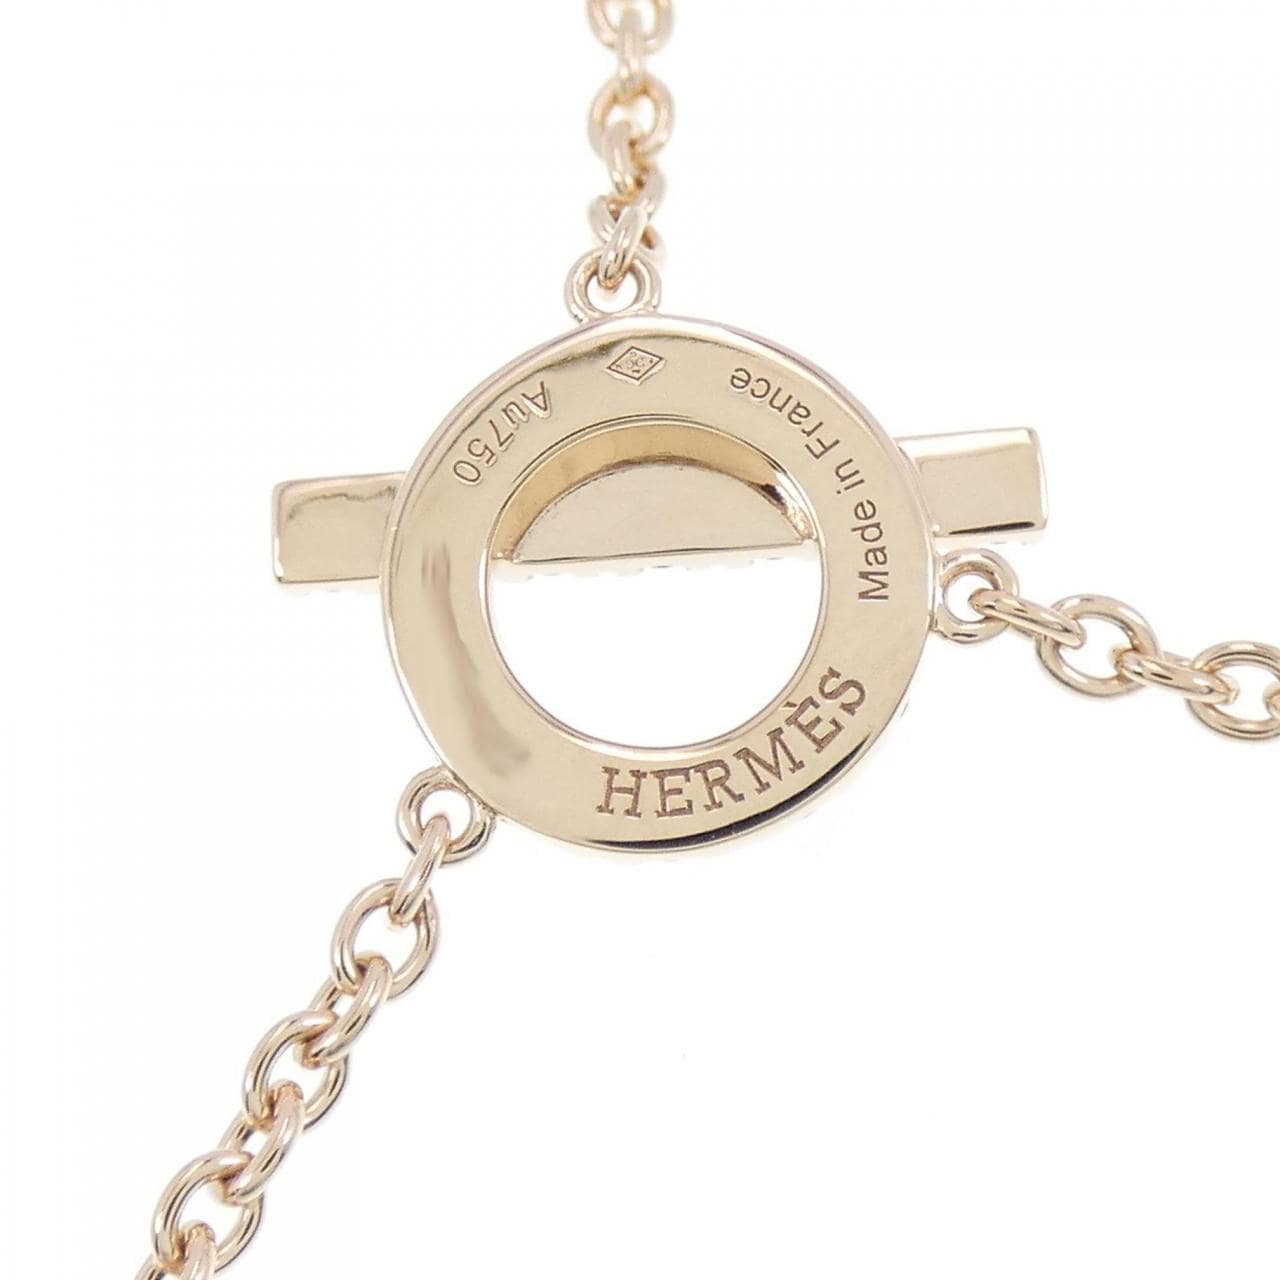 Hermès White Gold And Diamond Small Finesse Pendant Available For Immediate  Sale At Sotheby's